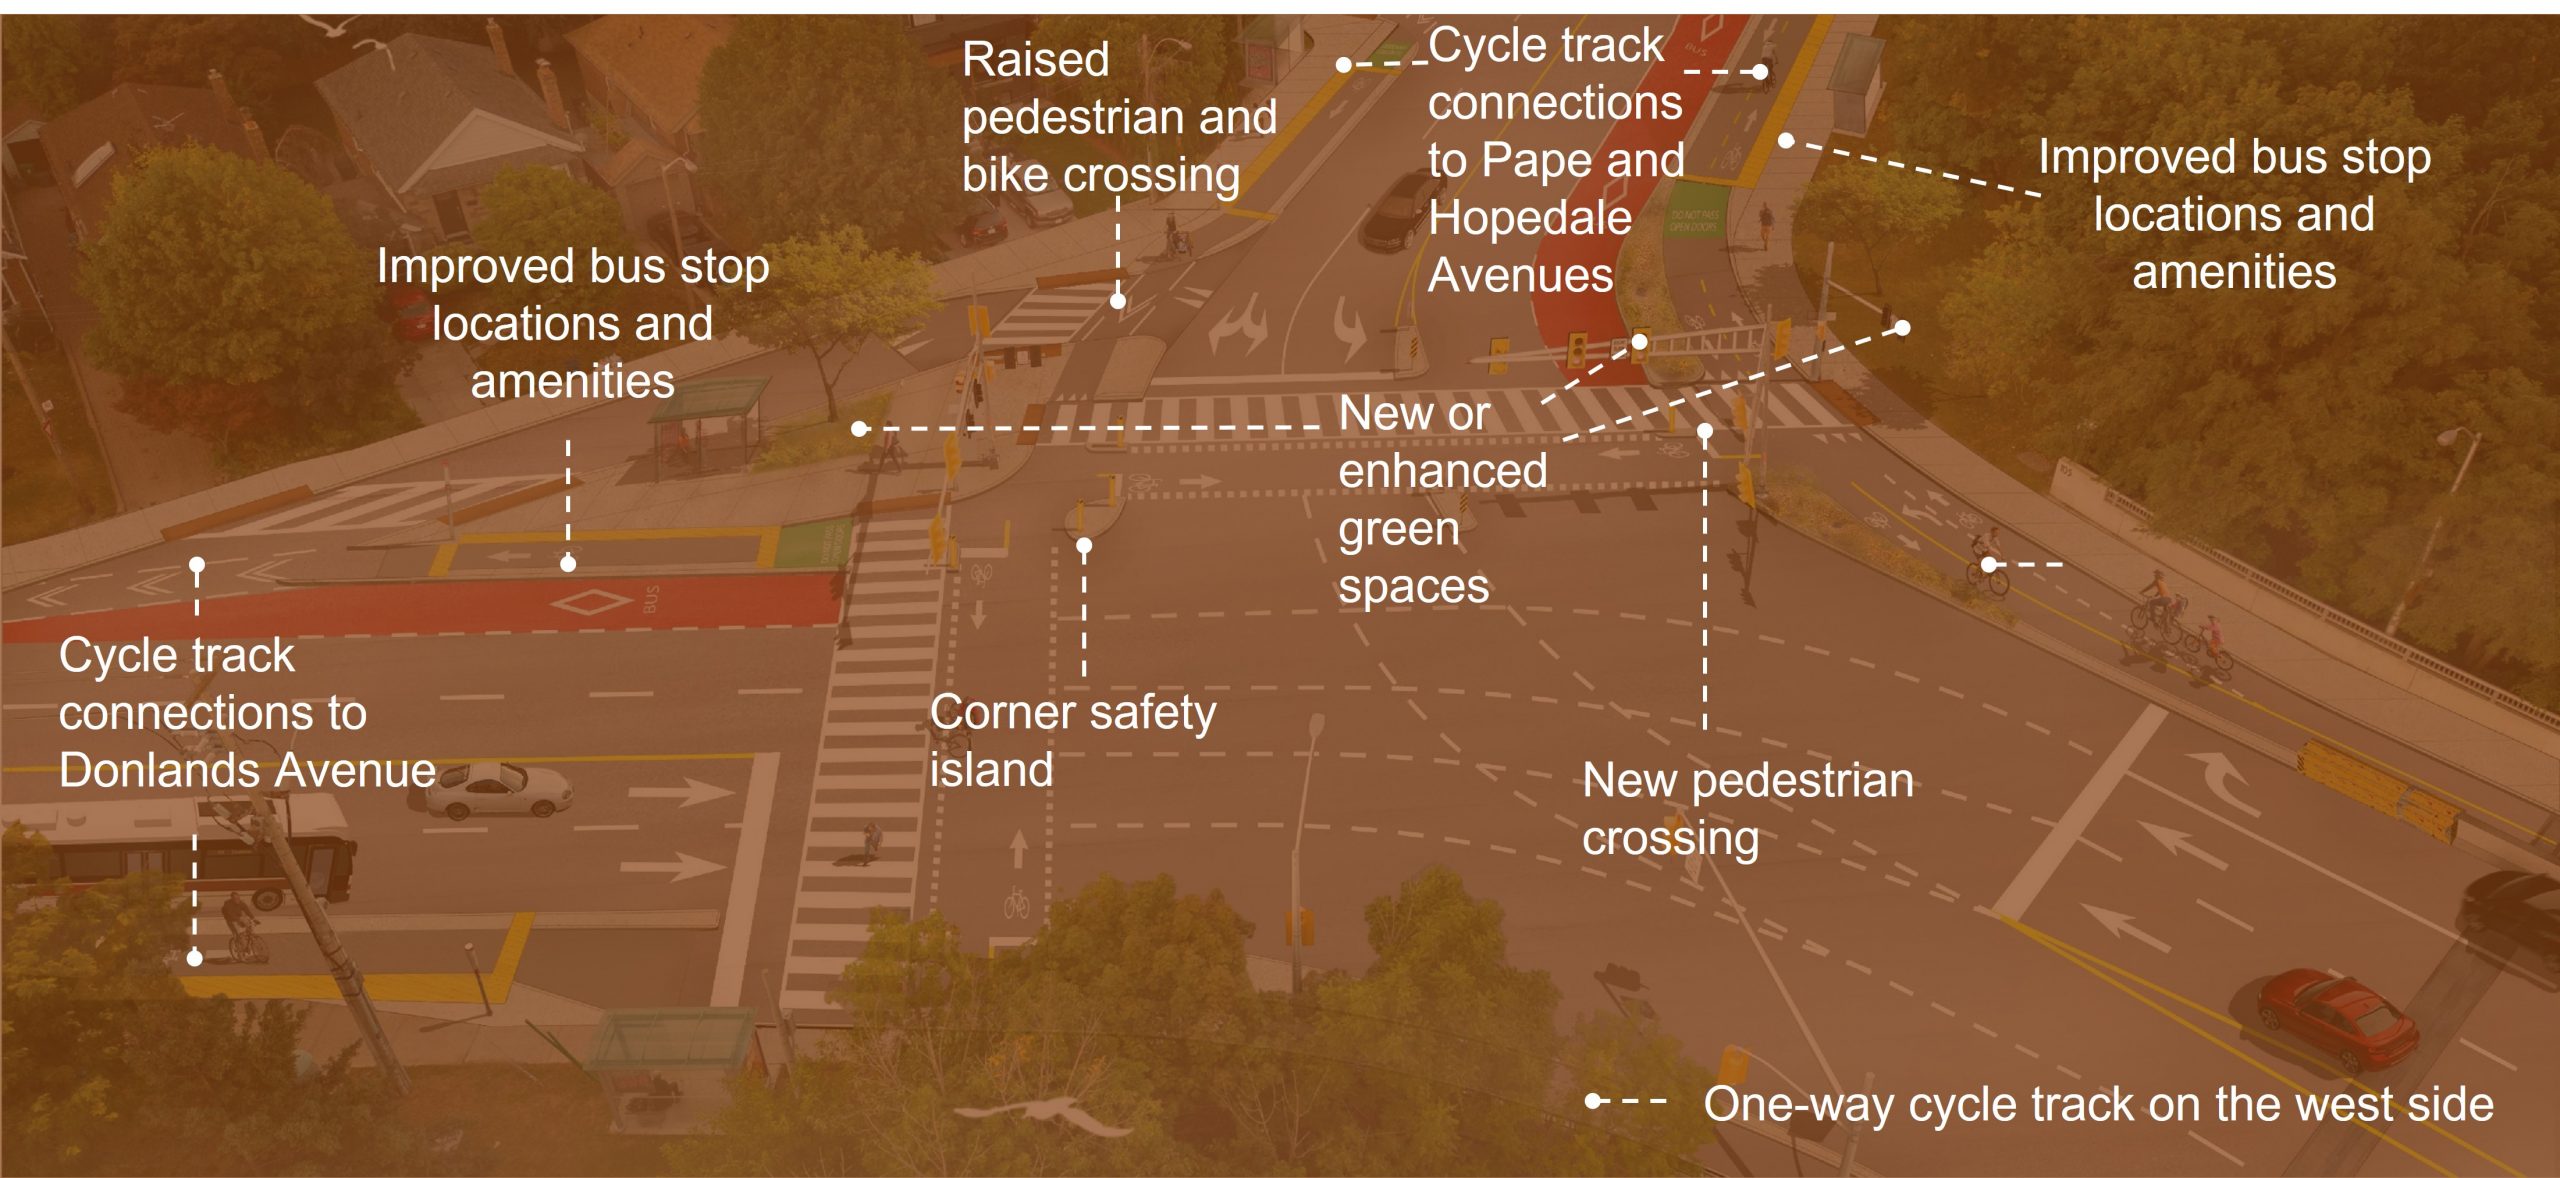 Labels pointing to areas of concern on the aerial view of the artistic rendering of the proposed design at Millwood Road at Pape Avenue & Donlands Avenue.